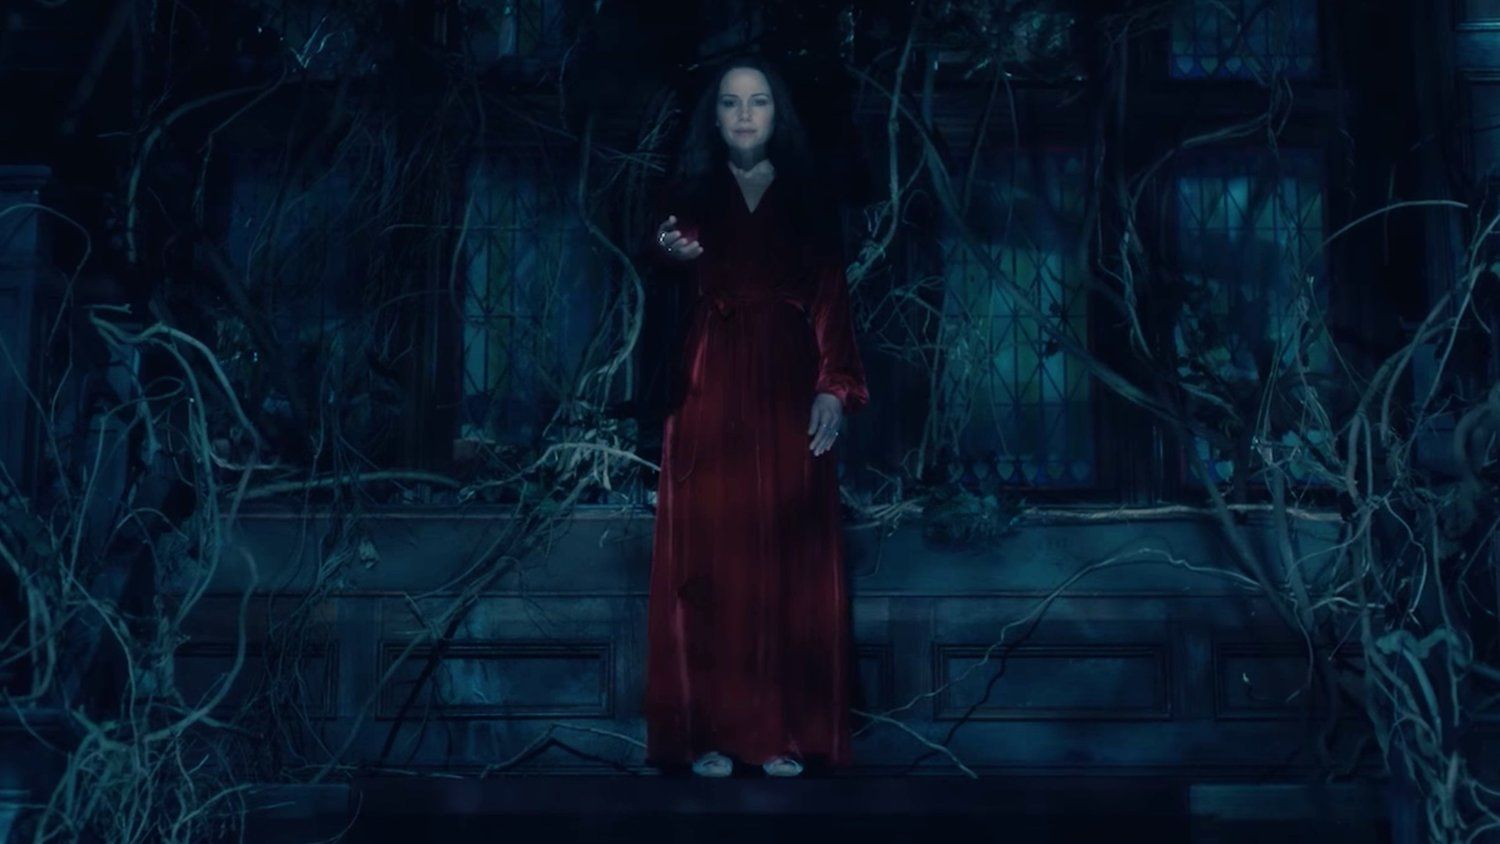 Awesomely Creepy Full For Netflix's New Horror Series THE HAUNTING OF HILL HOUSE